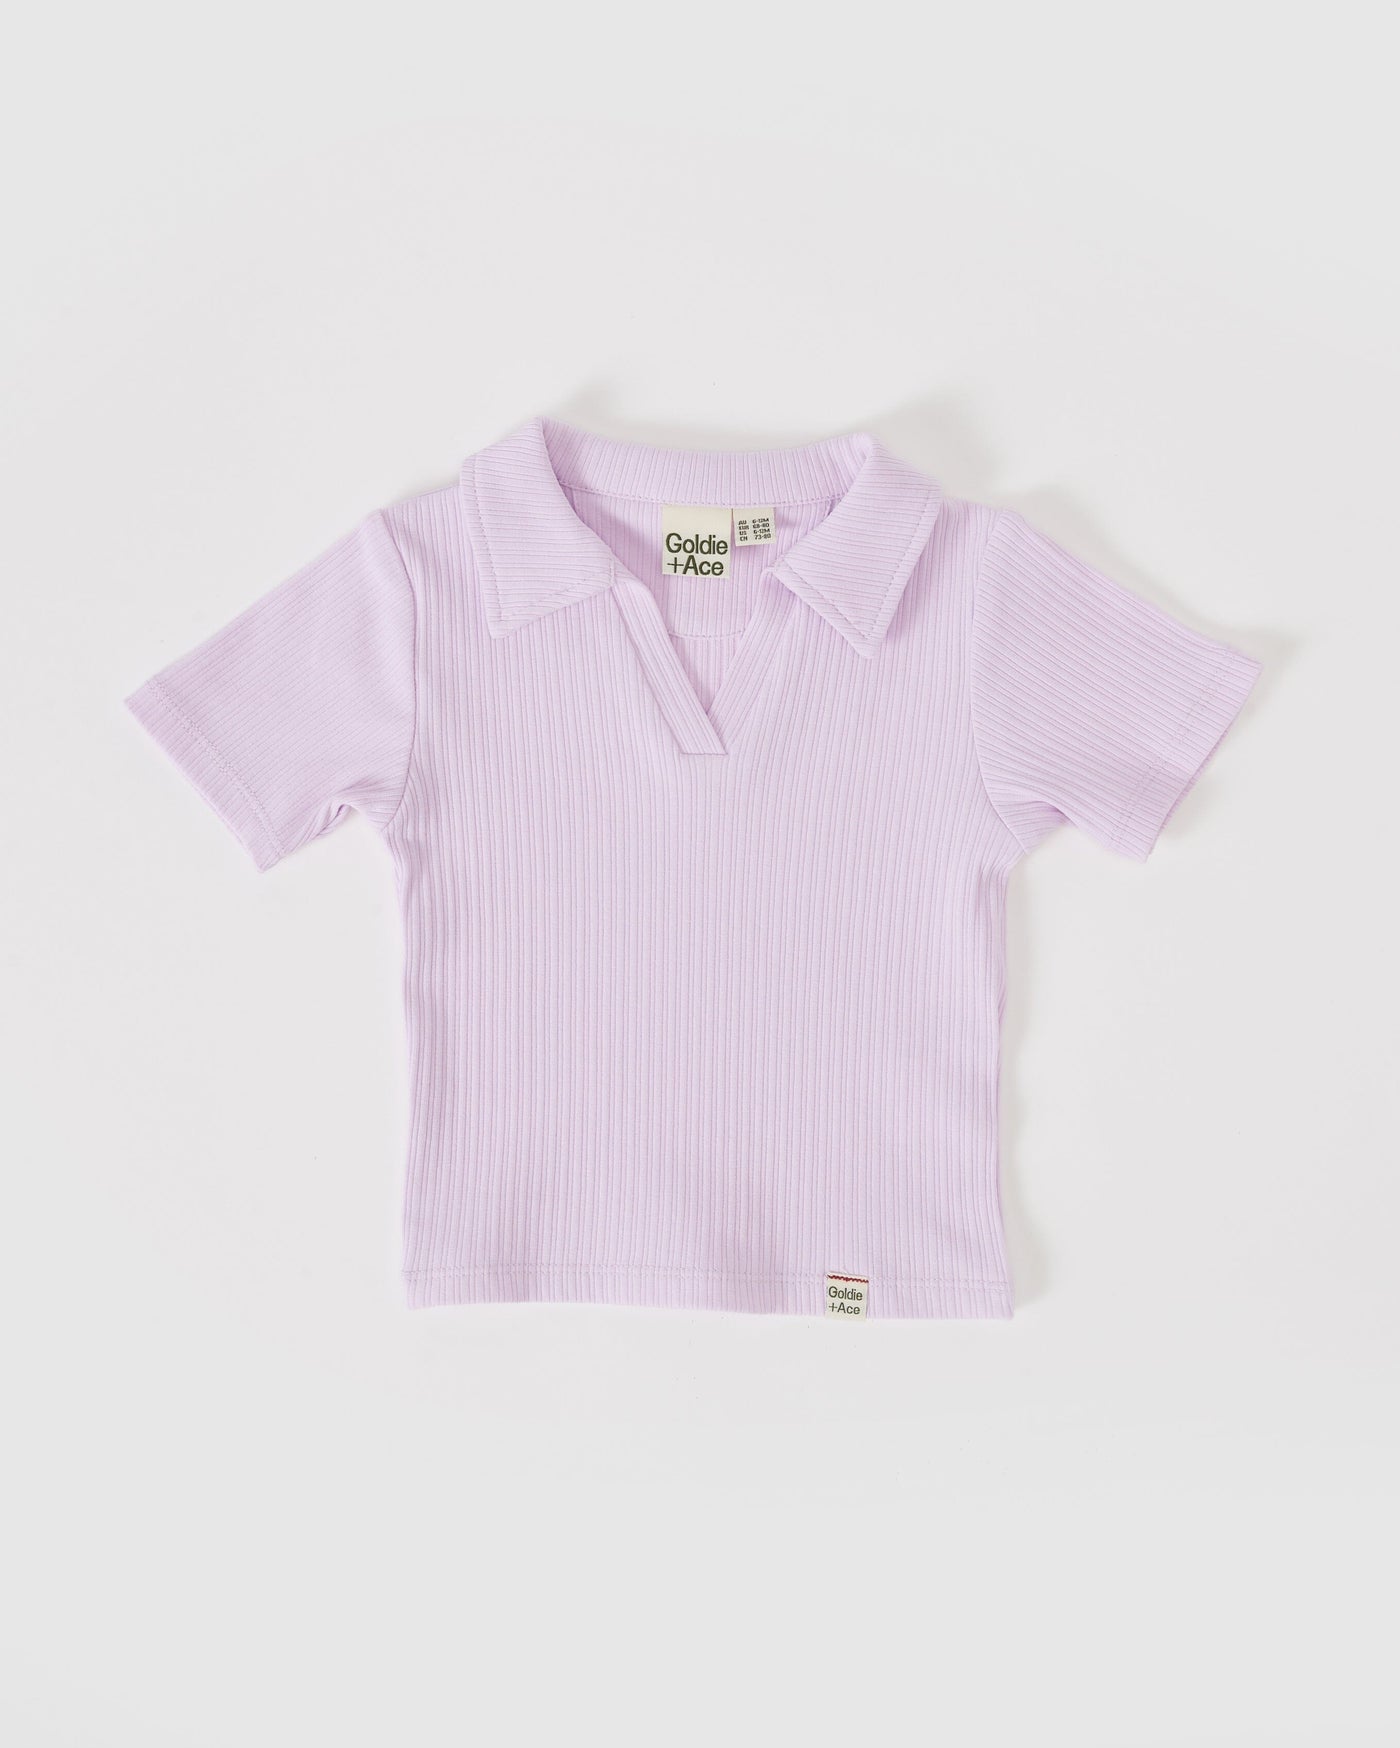 Goldie & Ace Pia Collared T-Shirt - Pink Short Sleeve T-Shirt Goldie & Ace 